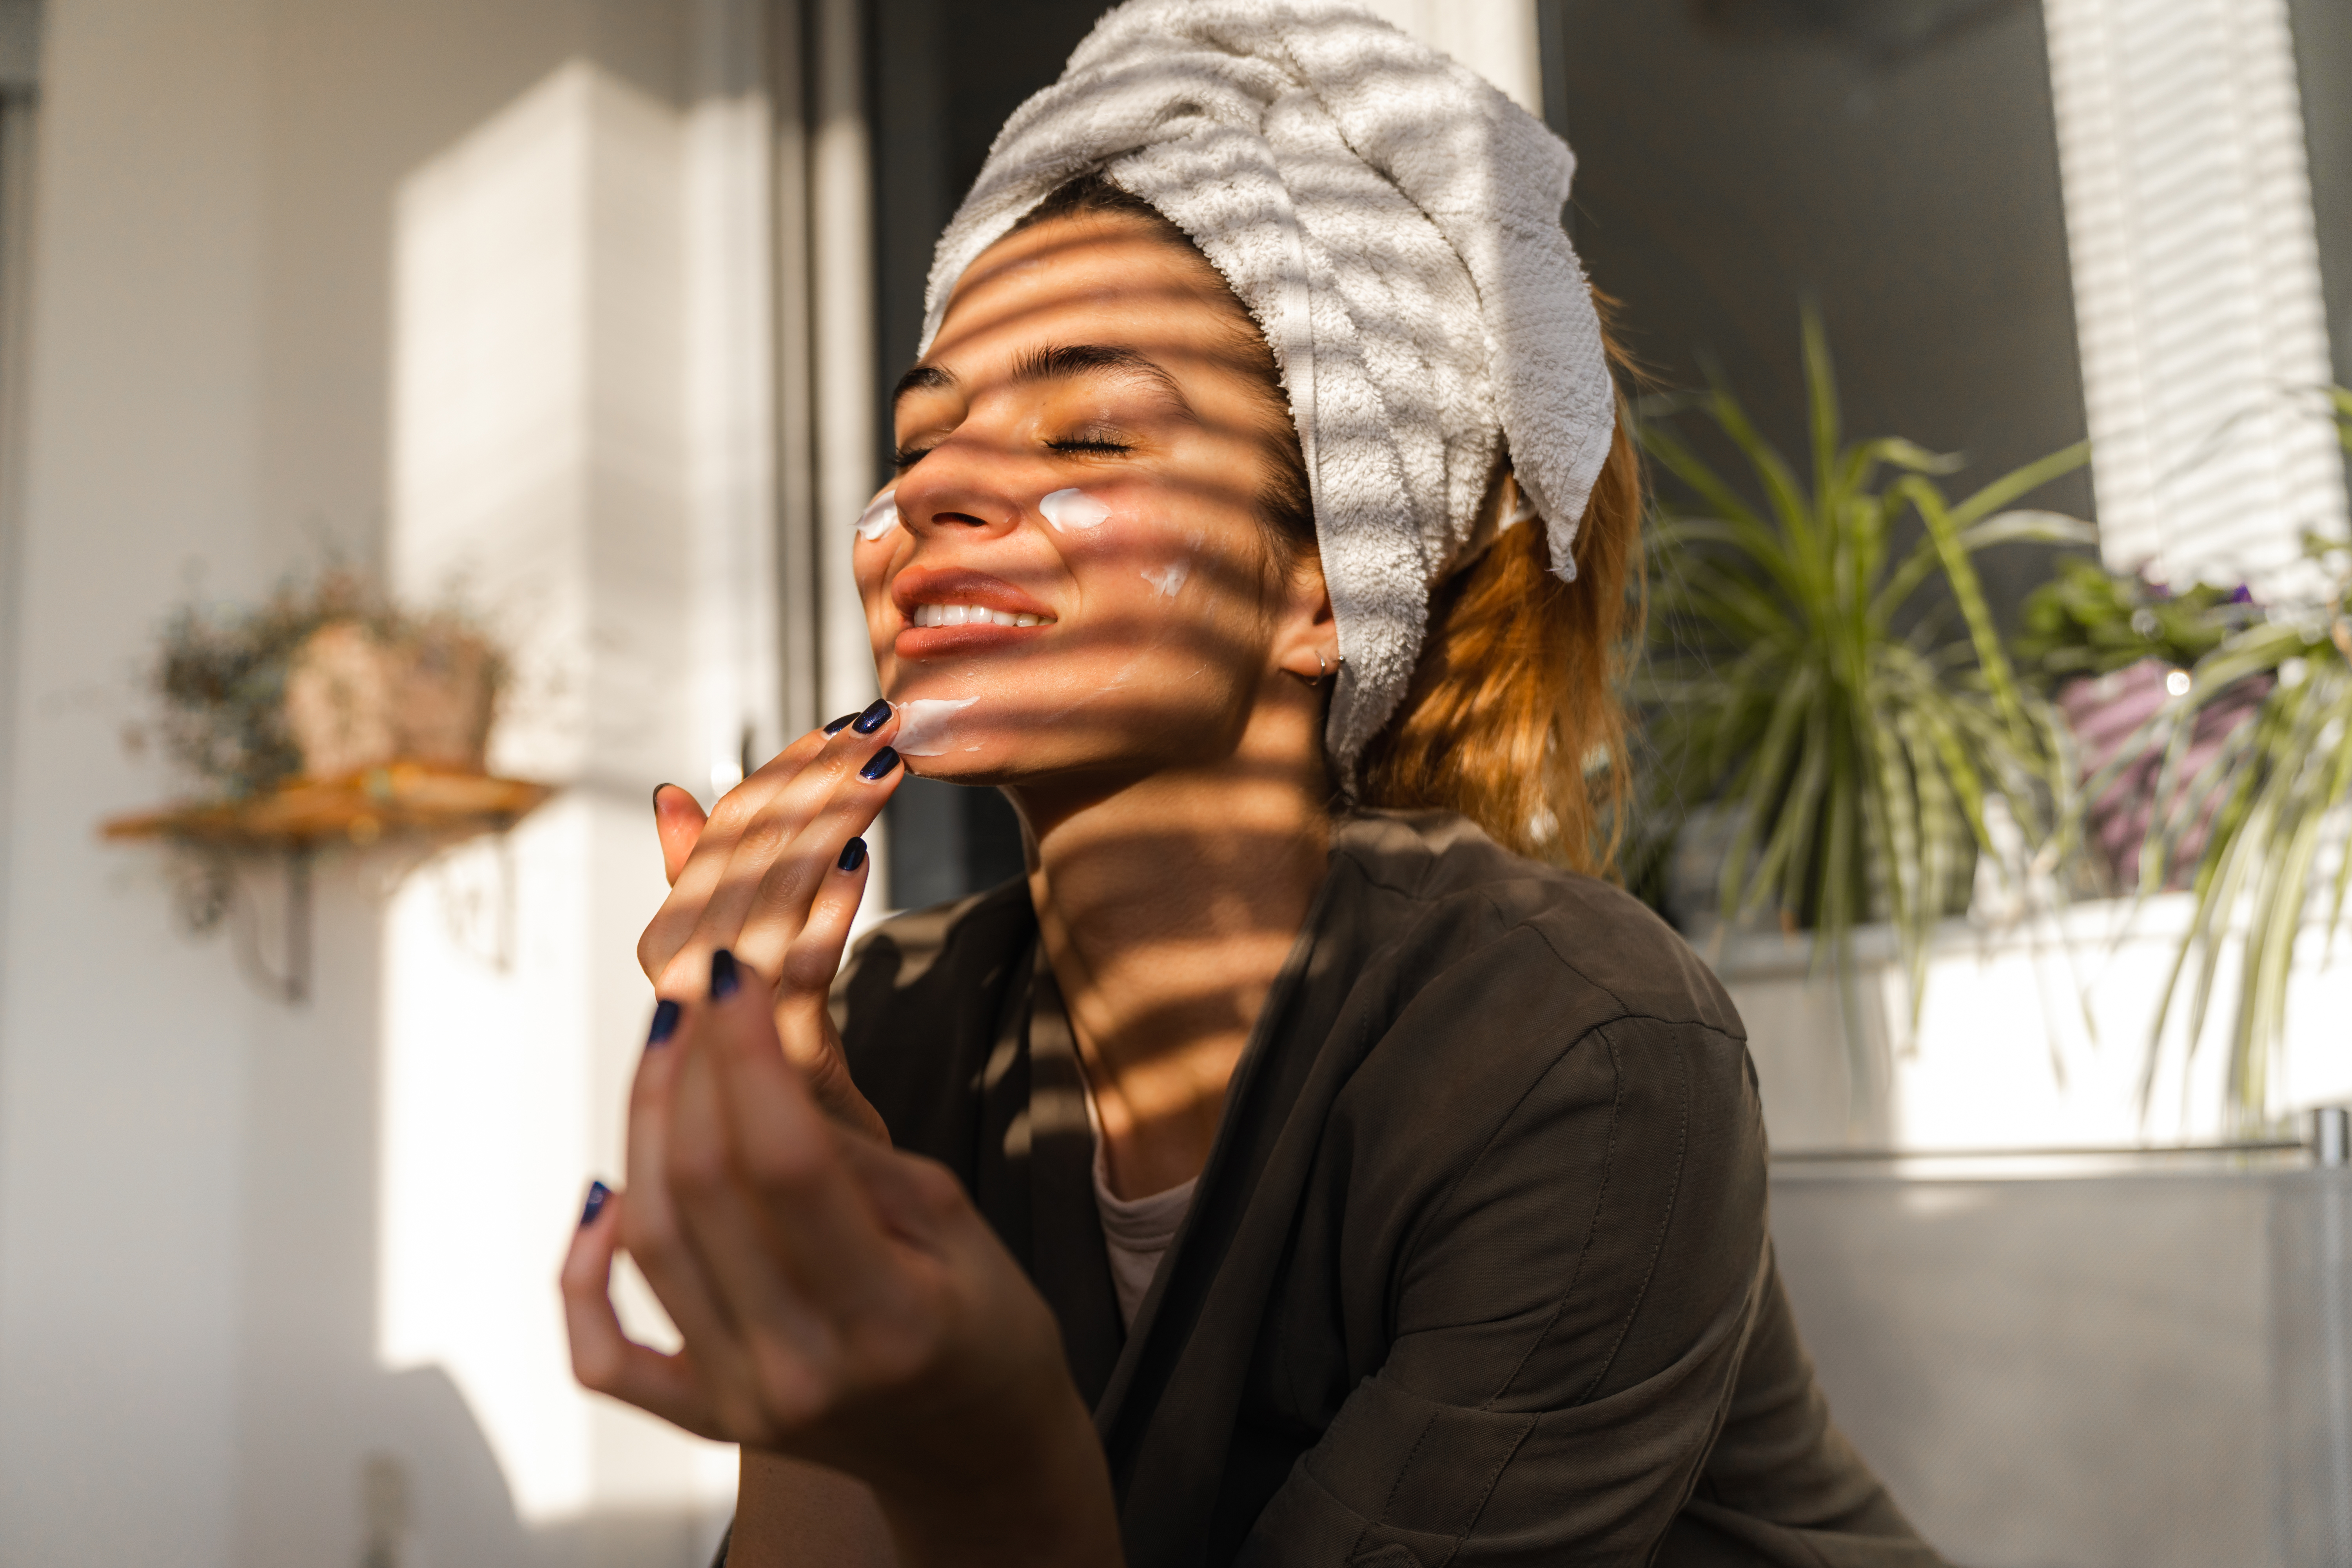 Woman in beautifully lighting applying a face mask